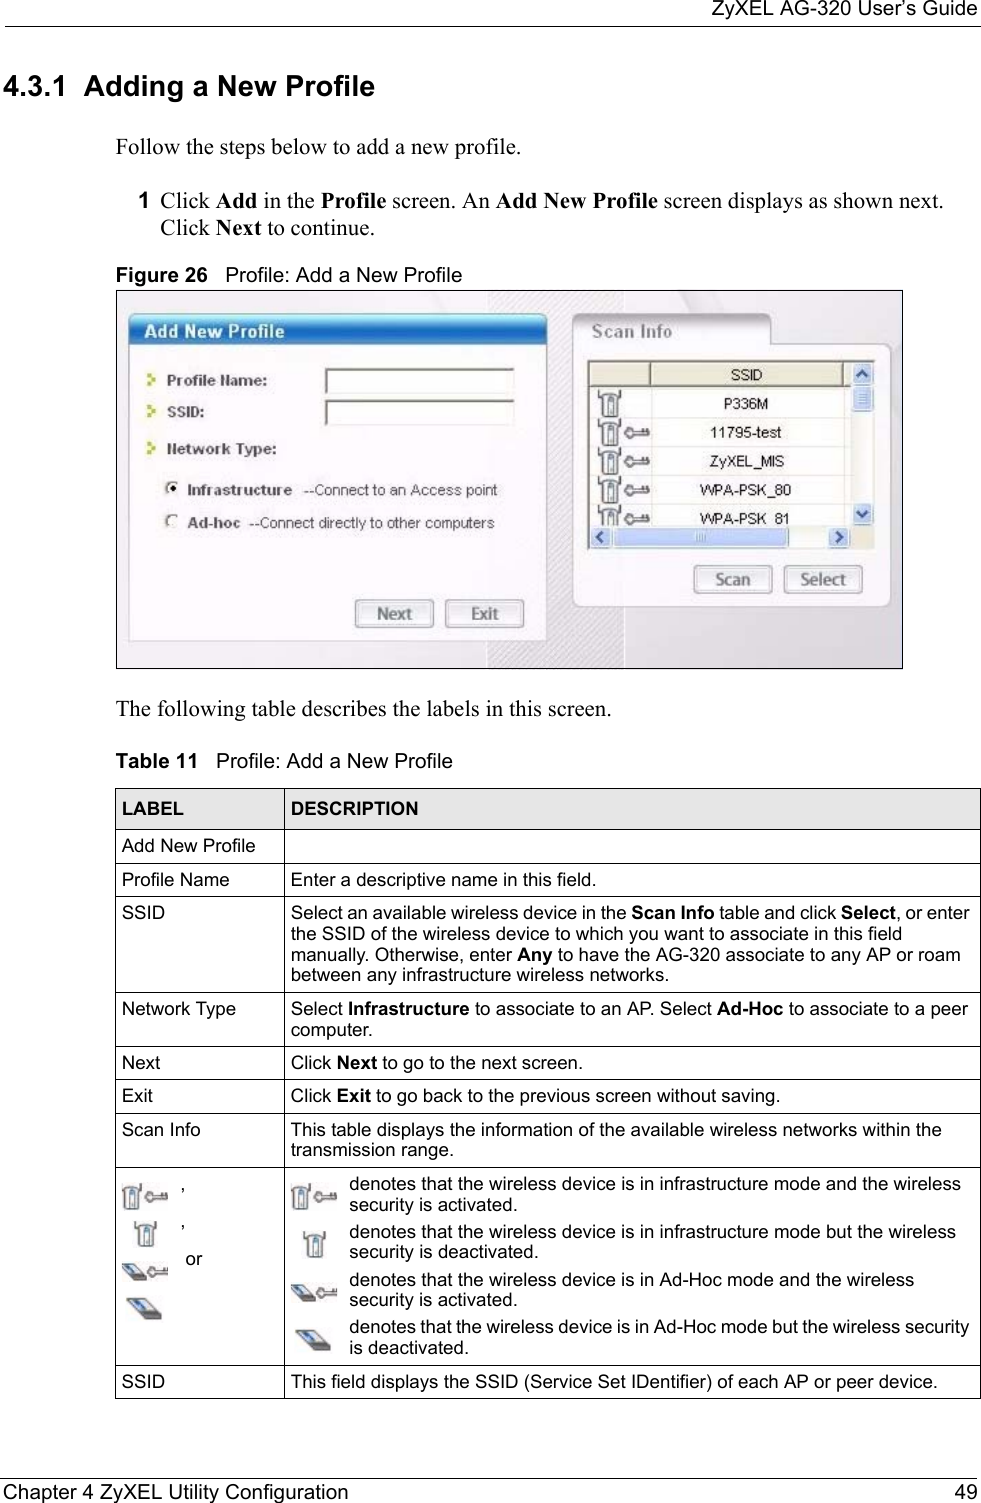 ZyXEL AG-320 User’s GuideChapter 4 ZyXEL Utility Configuration 494.3.1  Adding a New ProfileFollow the steps below to add a new profile.1Click Add in the Profile screen. An Add New Profile screen displays as shown next. Click Next to continue.Figure 26   Profile: Add a New Profile The following table describes the labels in this screen. Table 11   Profile: Add a New Profile LABEL DESCRIPTIONAdd New ProfileProfile Name Enter a descriptive name in this field.SSID Select an available wireless device in the Scan Info table and click Select, or enter the SSID of the wireless device to which you want to associate in this field manually. Otherwise, enter Any to have the AG-320 associate to any AP or roam between any infrastructure wireless networks.Network Type Select Infrastructure to associate to an AP. Select Ad-Hoc to associate to a peer computer.Next Click Next to go to the next screen.Exit Click Exit to go back to the previous screen without saving.Scan Info This table displays the information of the available wireless networks within the transmission range.,, ordenotes that the wireless device is in infrastructure mode and the wireless security is activated.denotes that the wireless device is in infrastructure mode but the wireless security is deactivated.denotes that the wireless device is in Ad-Hoc mode and the wireless security is activated.denotes that the wireless device is in Ad-Hoc mode but the wireless security is deactivated.SSID This field displays the SSID (Service Set IDentifier) of each AP or peer device.